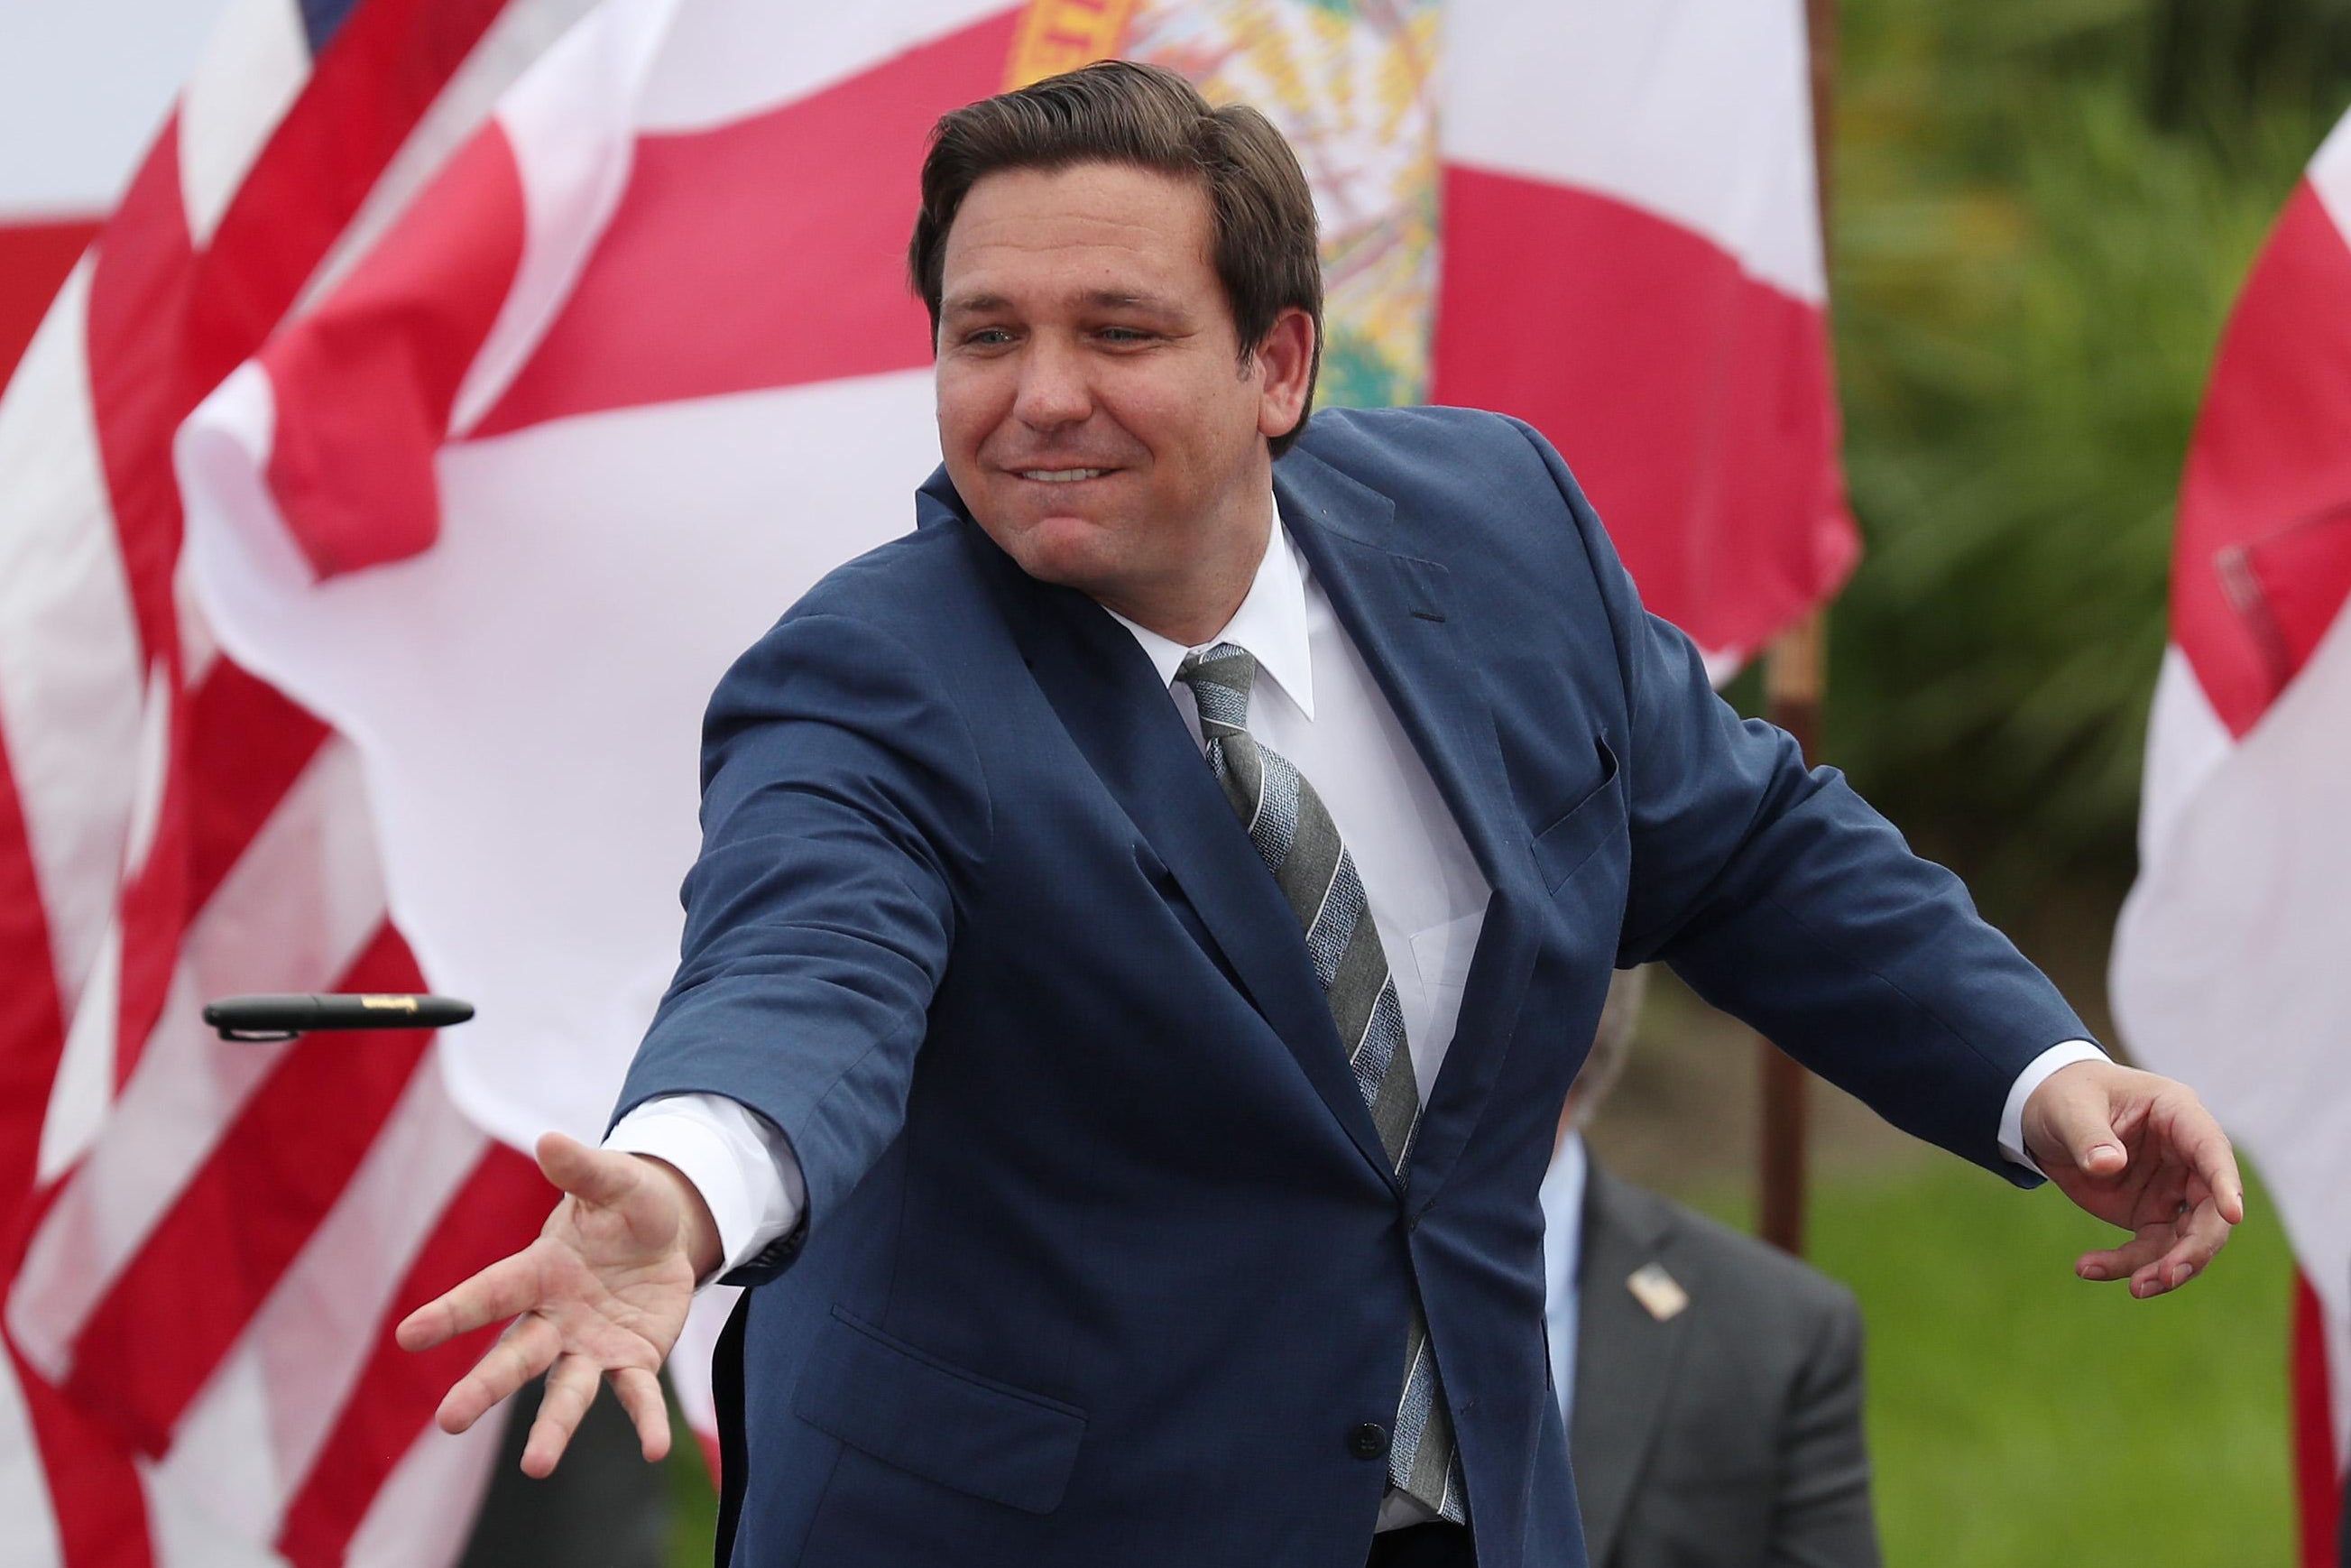 Ron DeSantis throws a black pen, with an American flag and a Florida state flag behind him.